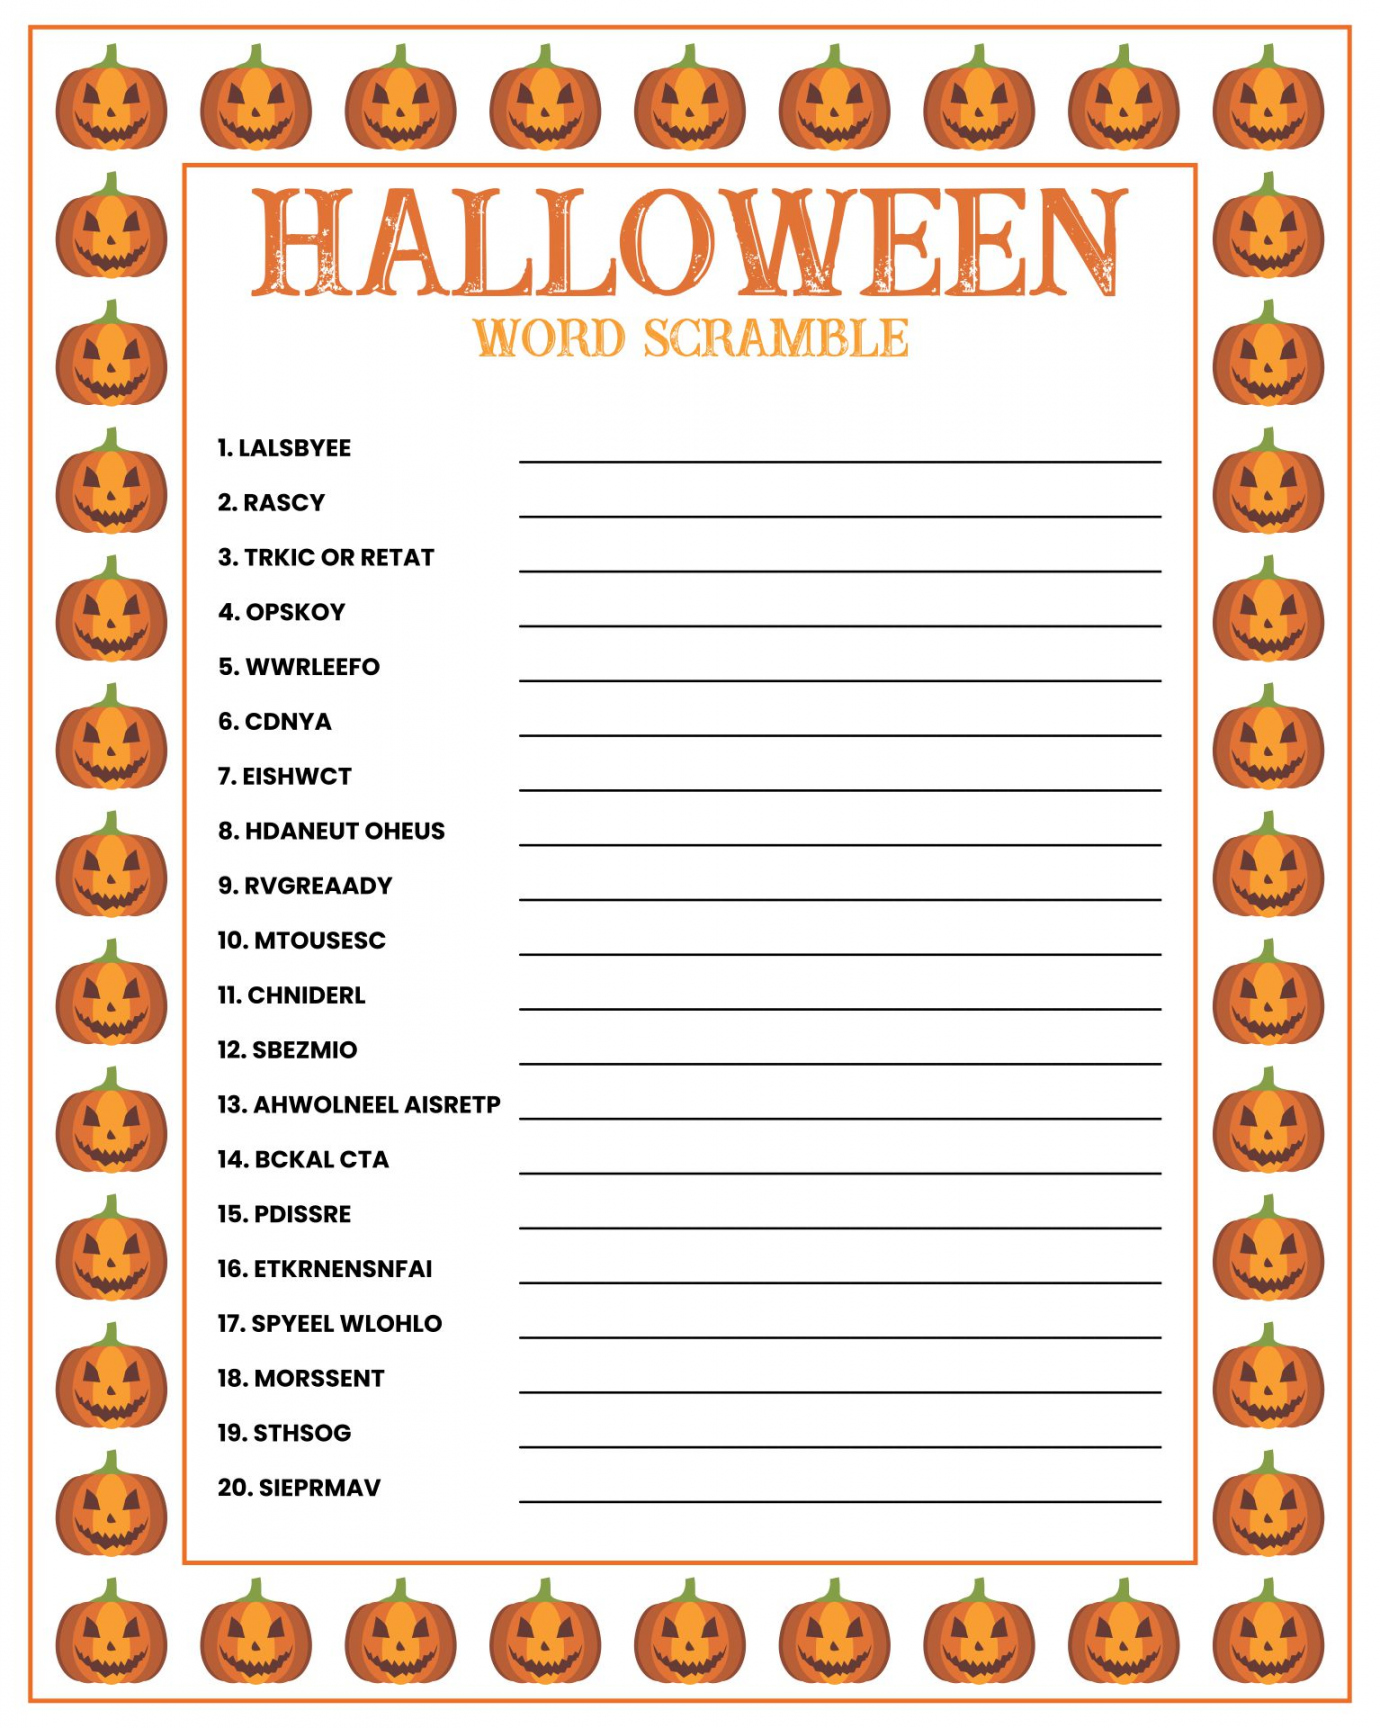 Best Adult Halloween Party Games Printable - printablee - Free Printable Halloween Games For Adults